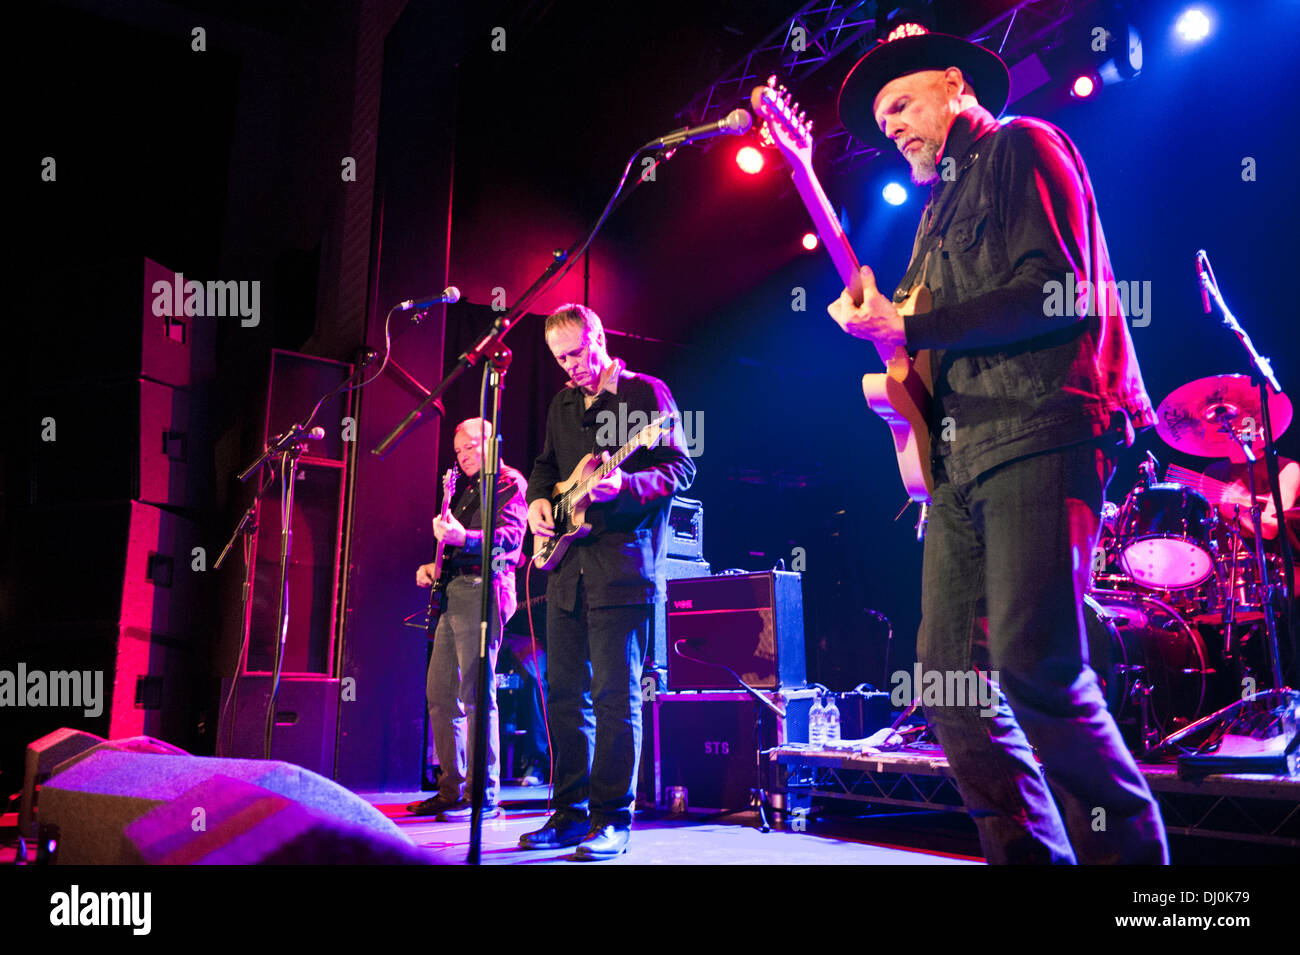 Manchester, UK. 17th November 2013. US rock band Television in concert at Manchester Academy. Fred Smith (bass), Tom Verlaine and Jimmy Rip, guitars Stock Photo